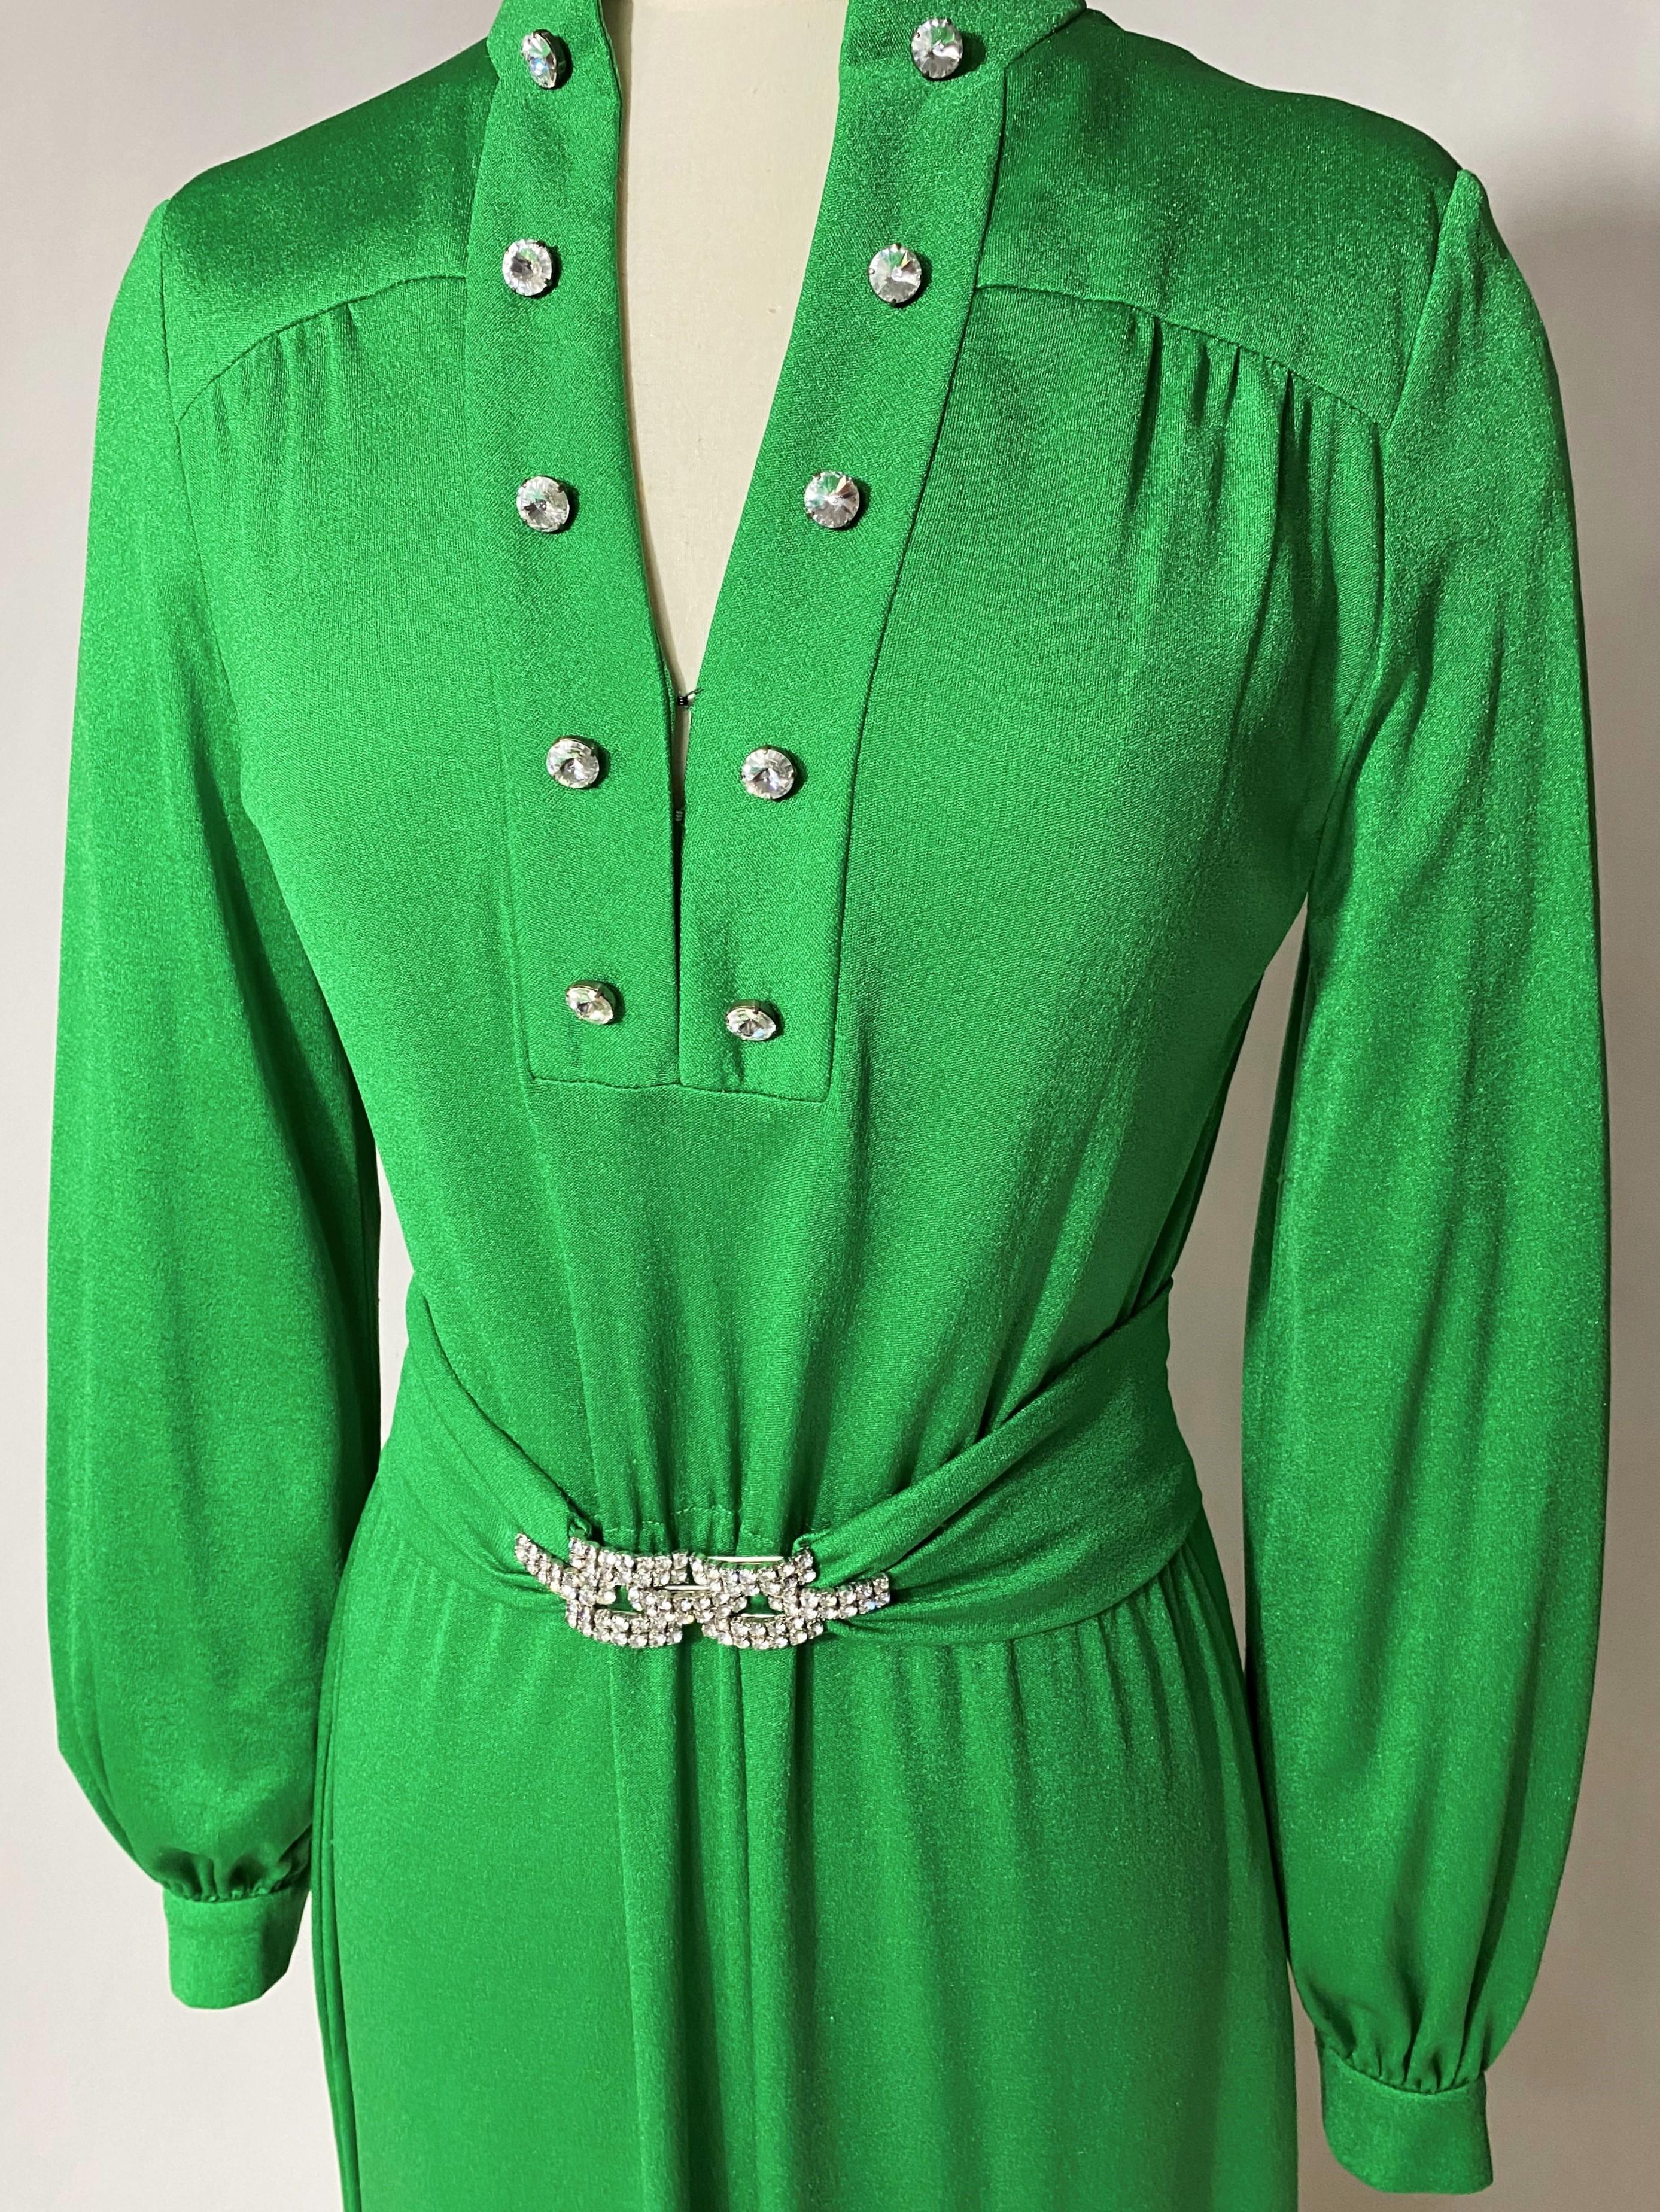 Circa 1970
Germany Berlin

Elegant flowing long dress in fir green stretch polyamide jersey by Berlin designer Uli Richter from the 1970s. The dress has long sleeves with slightly puffed cuffs and an elastic waistband. Crew neckline with split front